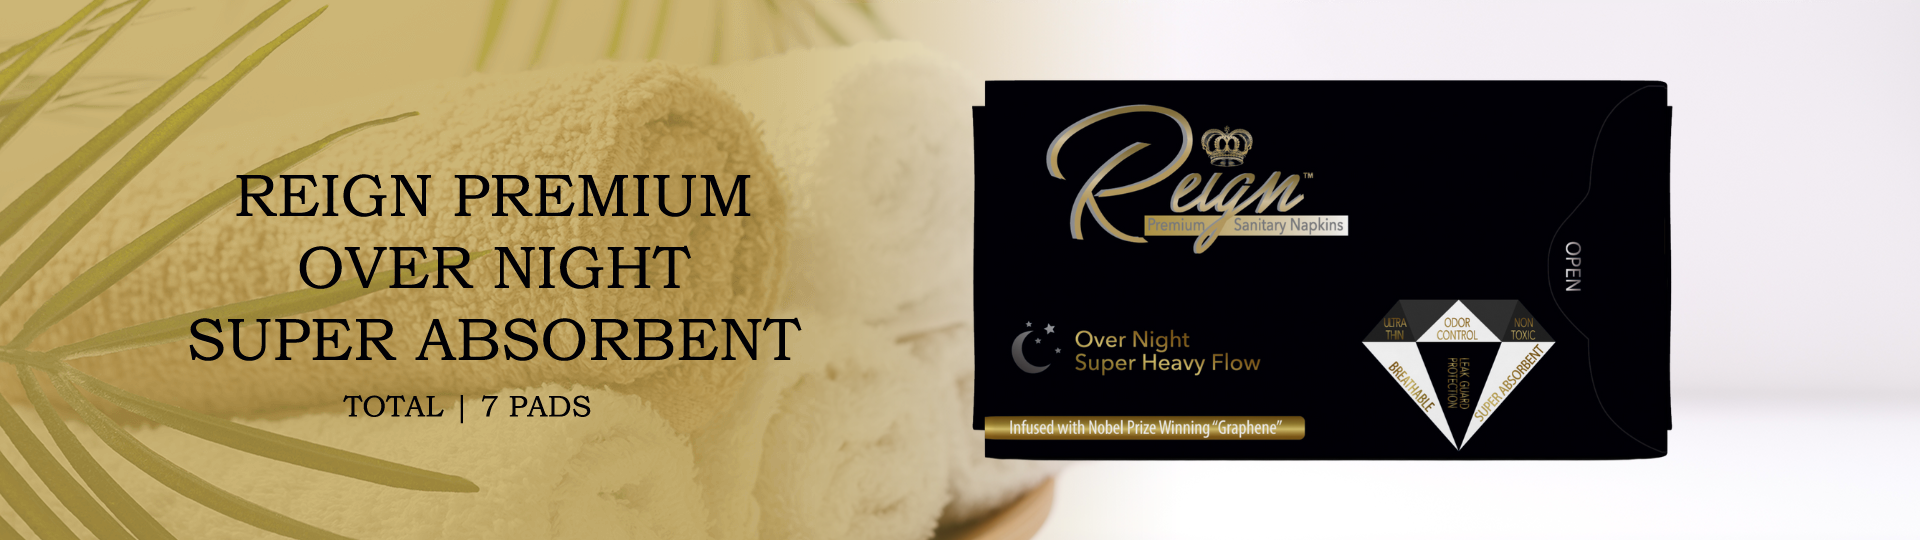 reign-pads-night-towels-gold-header